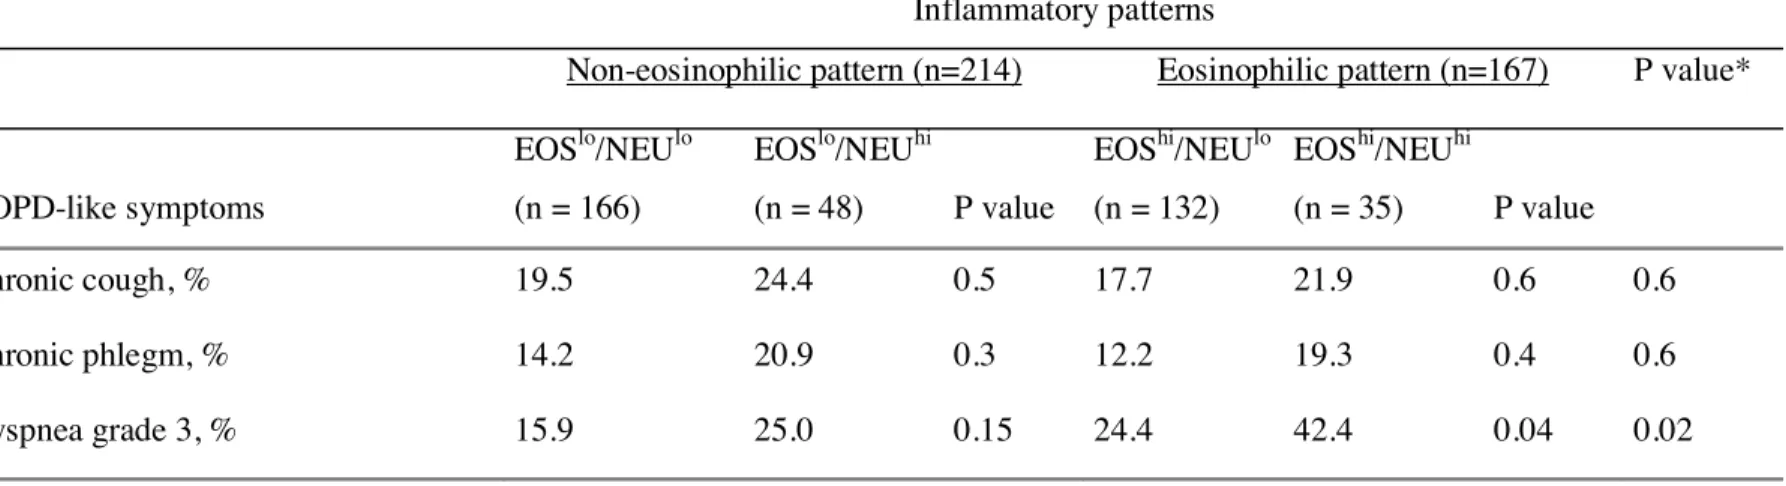 Table 4.- COPD-like symptoms in adult asthmatics according to their blood inflammatory pattern  Inflammatory patterns 